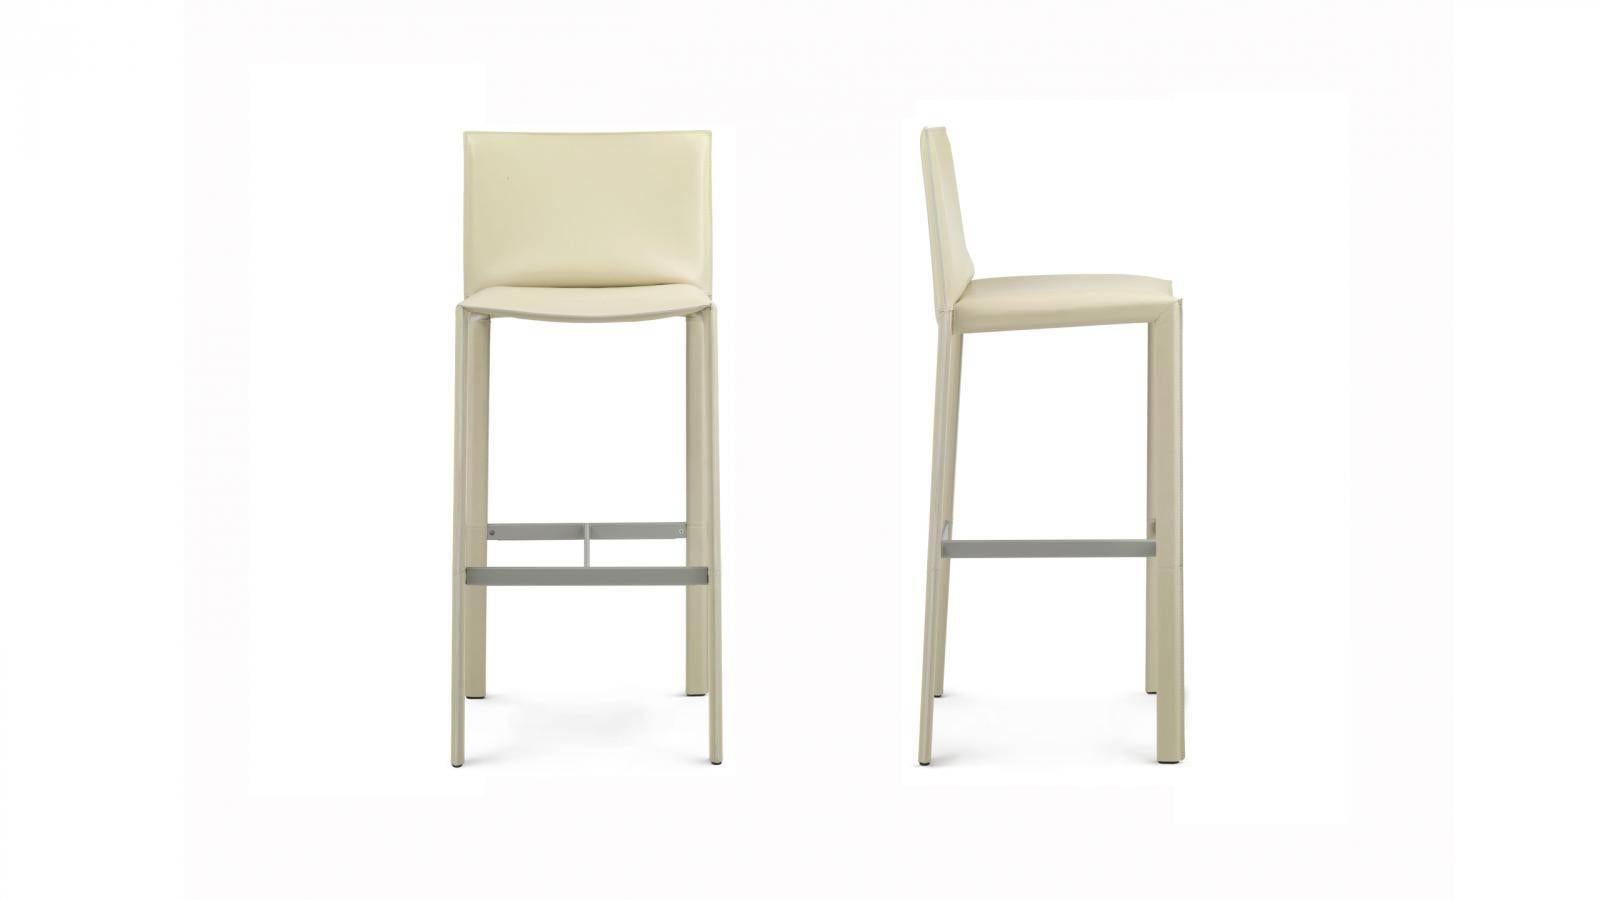 Italian Modern bar stool or counter stool (your choice) from our Italian Modern Furniture Collection, available in different colors. Italian thick hide leather with visible stitching, high quality manufacturing. The thick high quality leather is